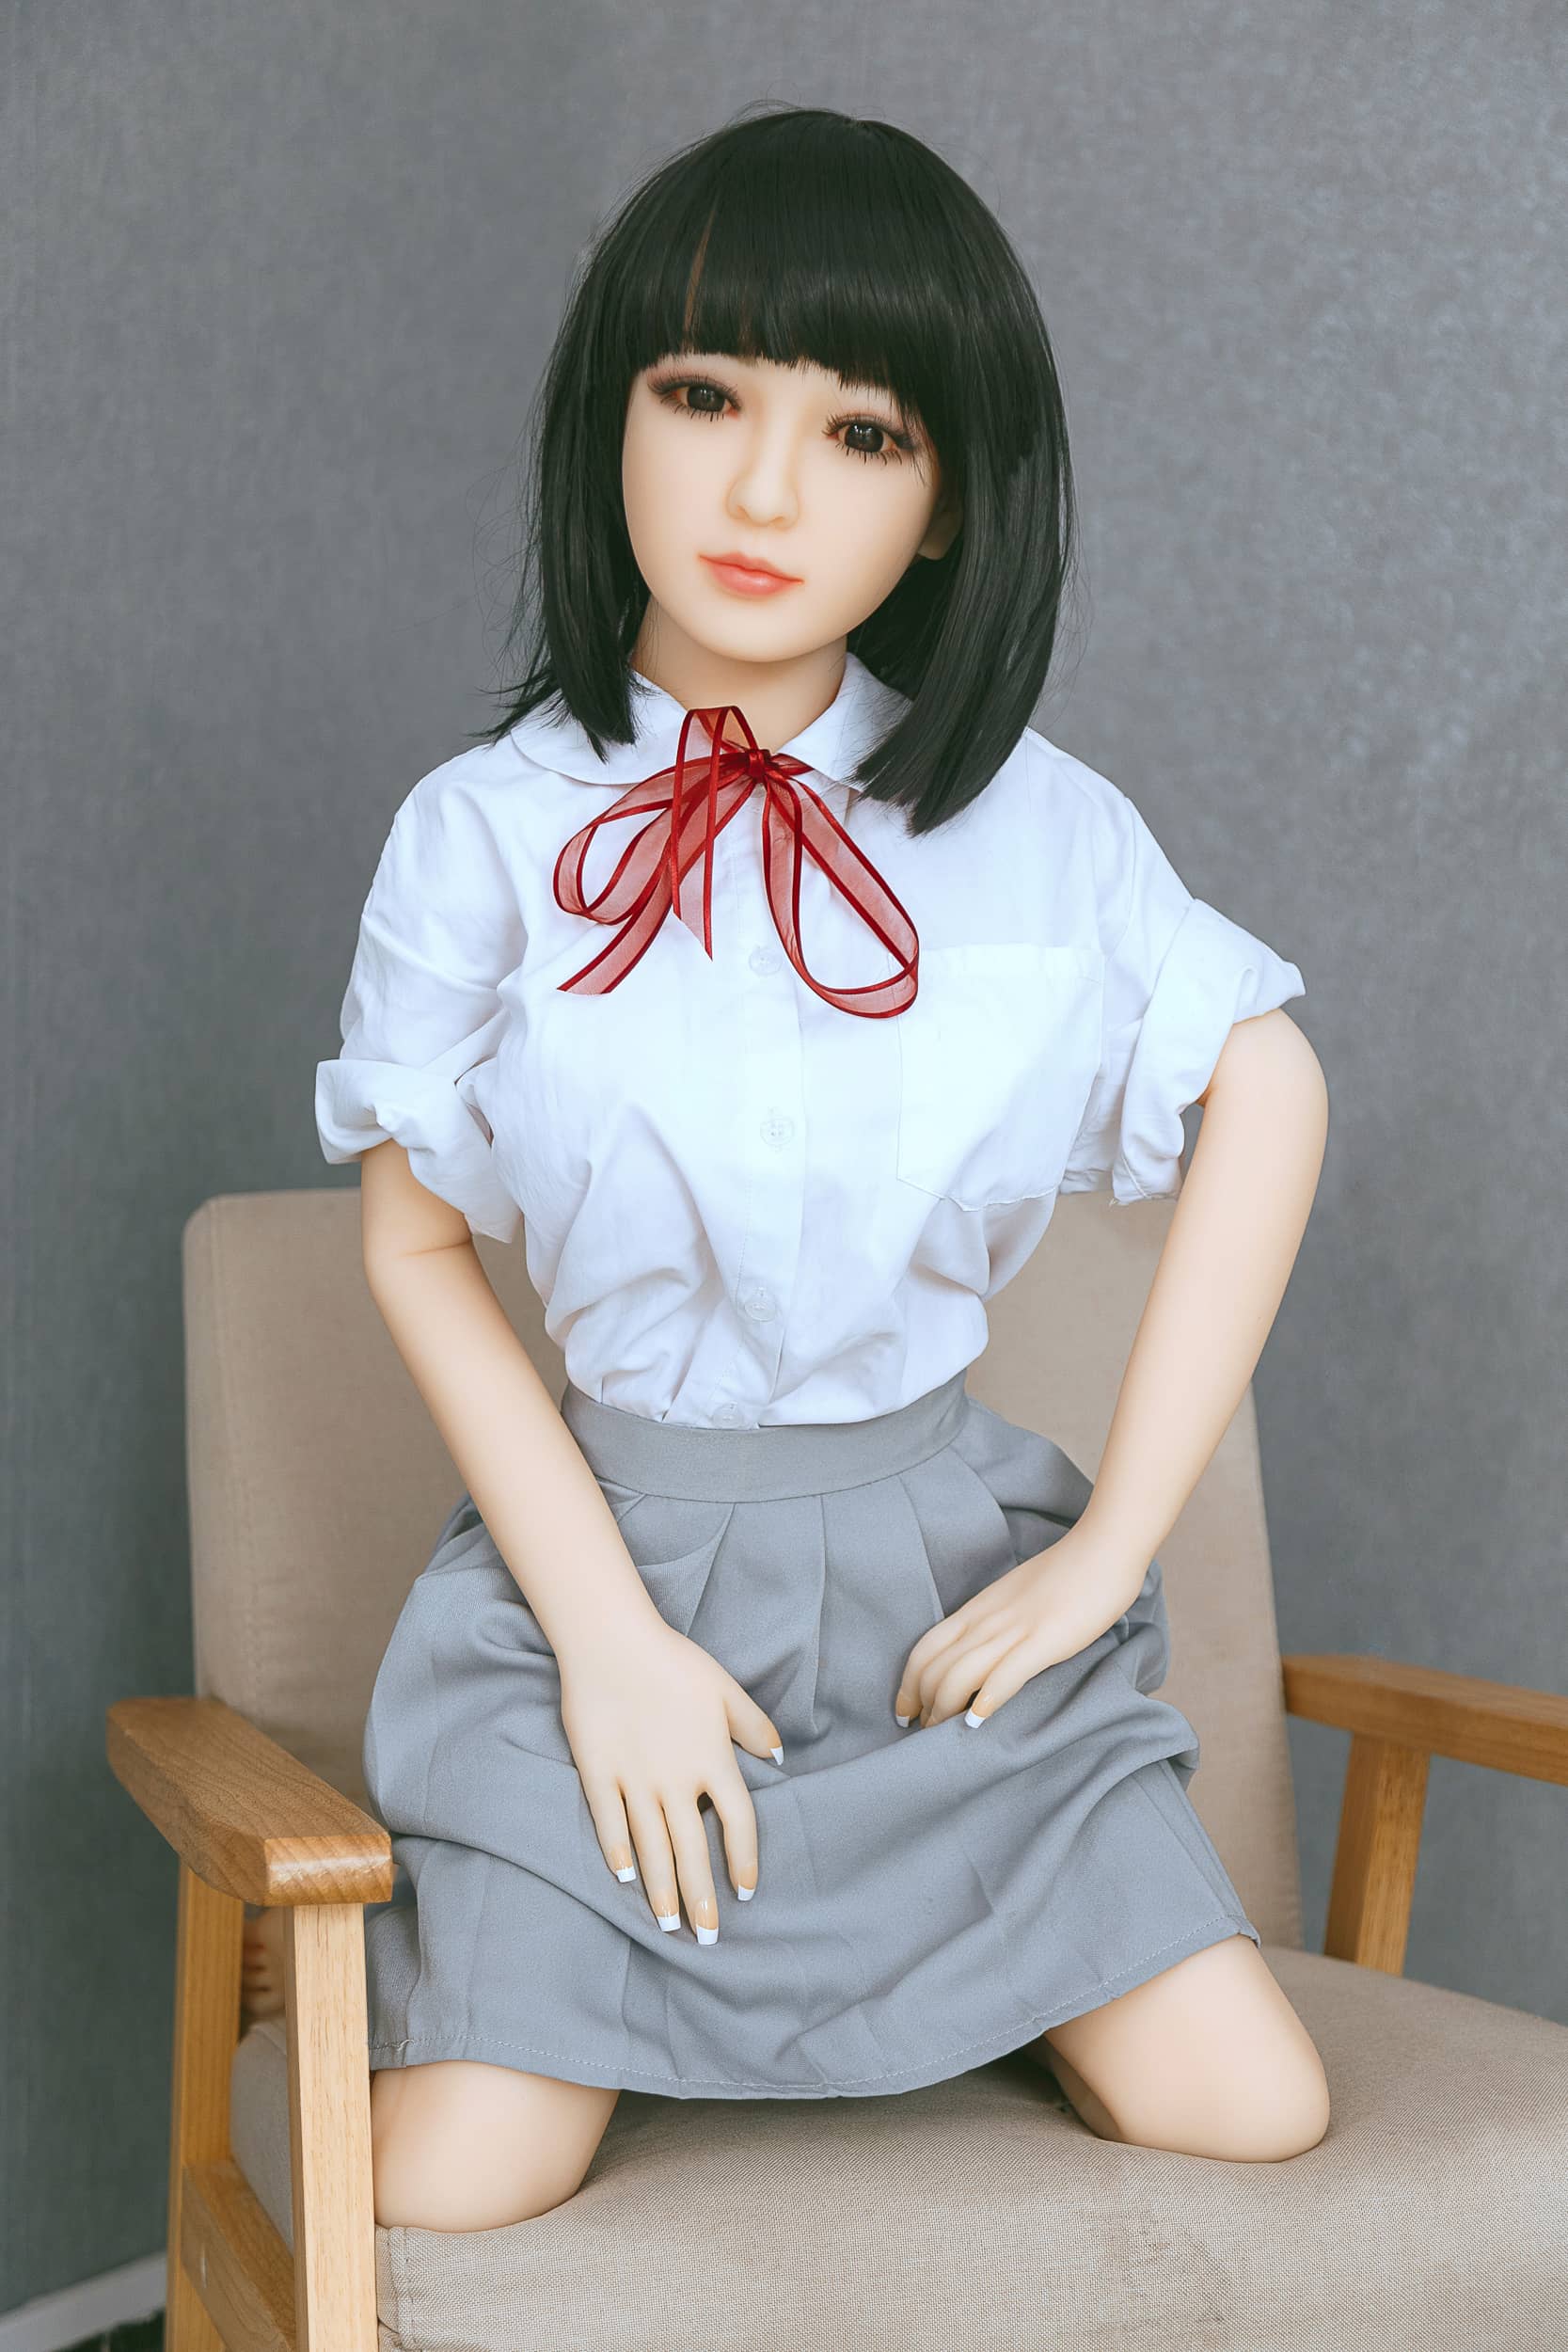 Small Love Doll Aibei Doll 128cm (4.20')  TPE Large Breast #141 -Paisley (NO.560) Aibei Doll Littlelovedoll